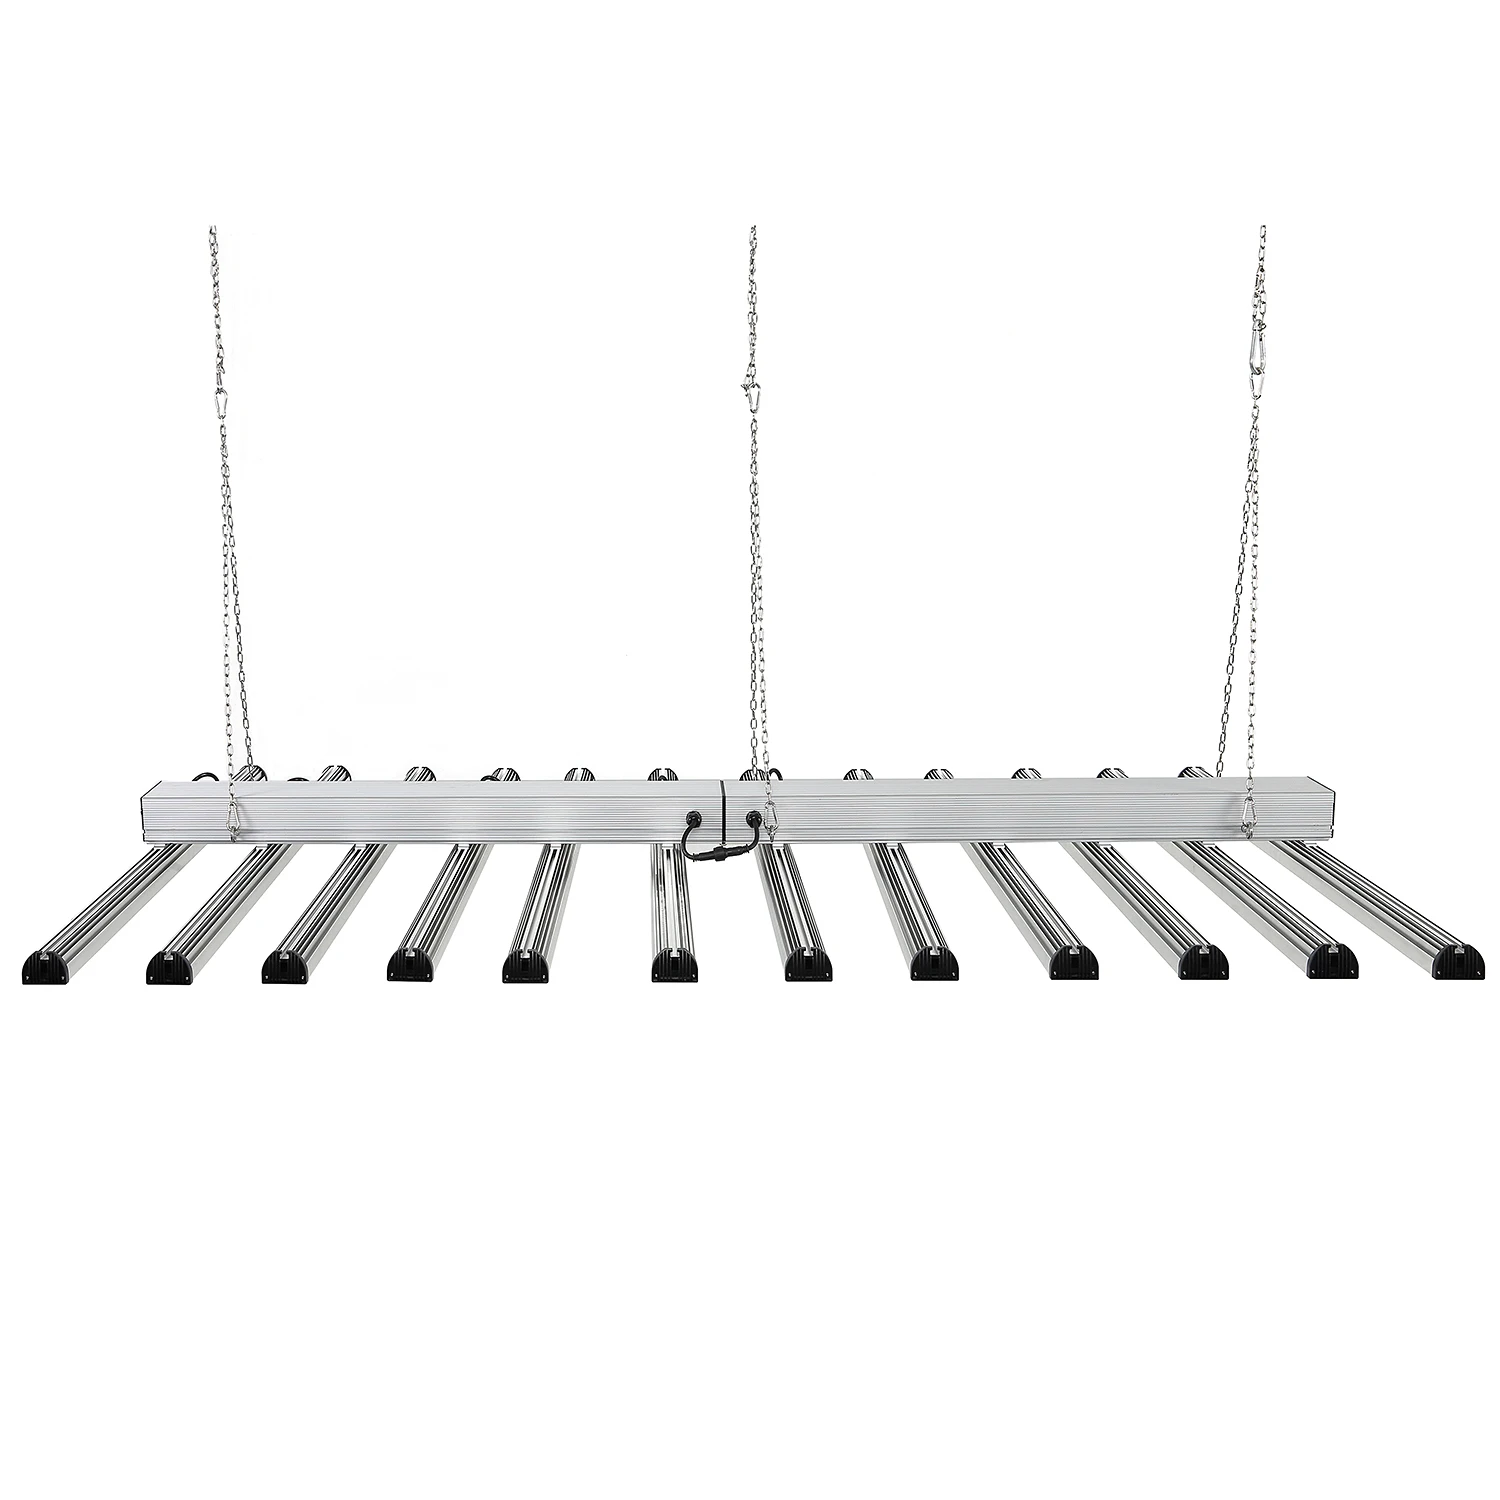 led grow light bar 12 in 1 wholesale waterproof IP65 full spectrum professional hydroponic lighting systems indoor plant